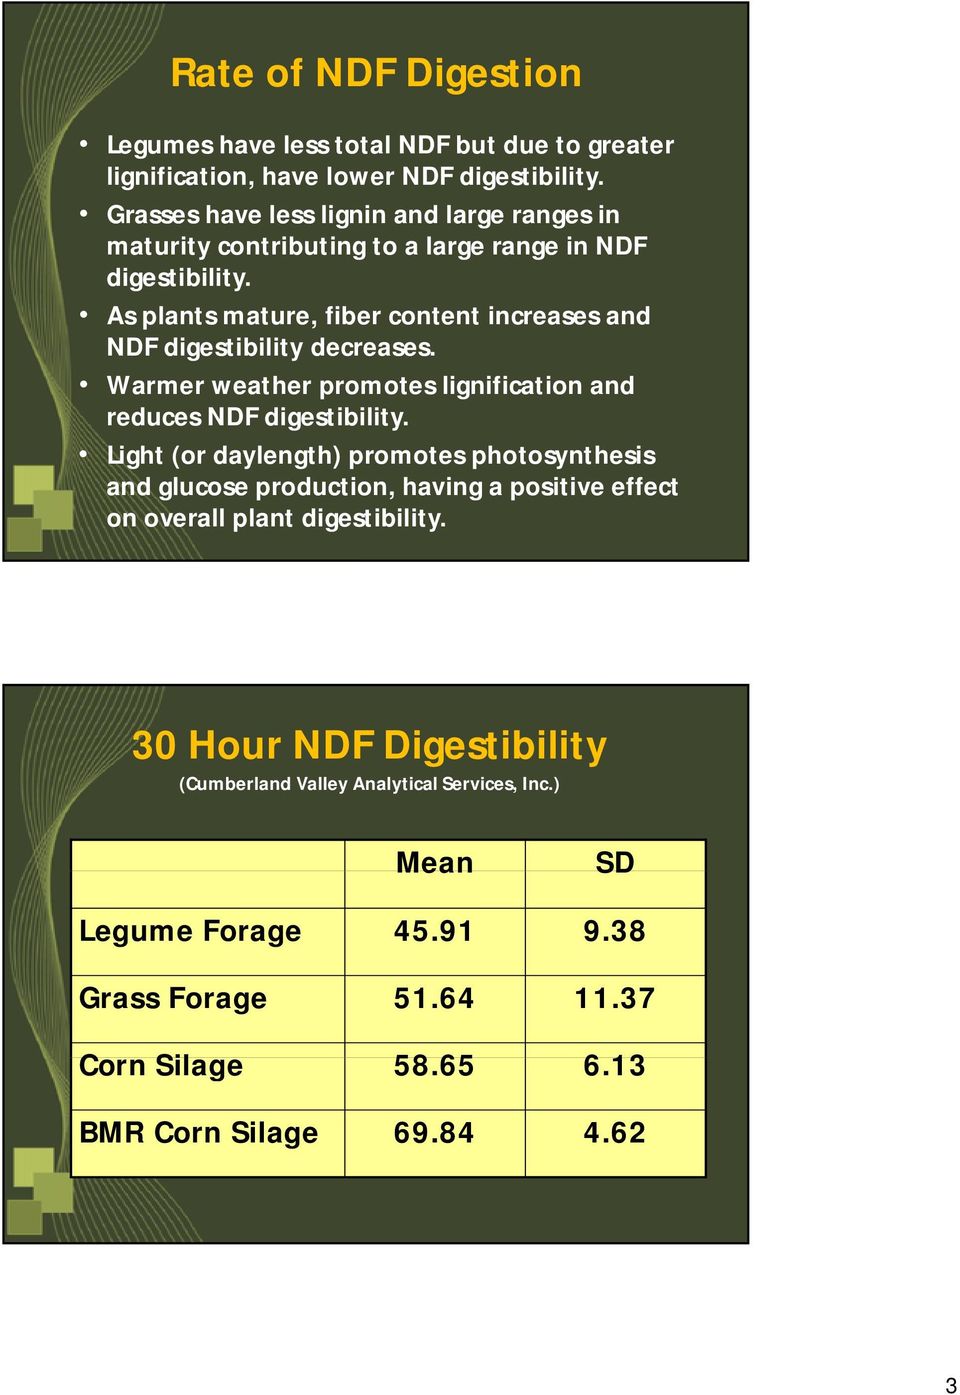 As plants mature, fiber content increases and NDF digestibility decreases. Warmer weather promotes lignificationifi i and reduces NDF digestibility.